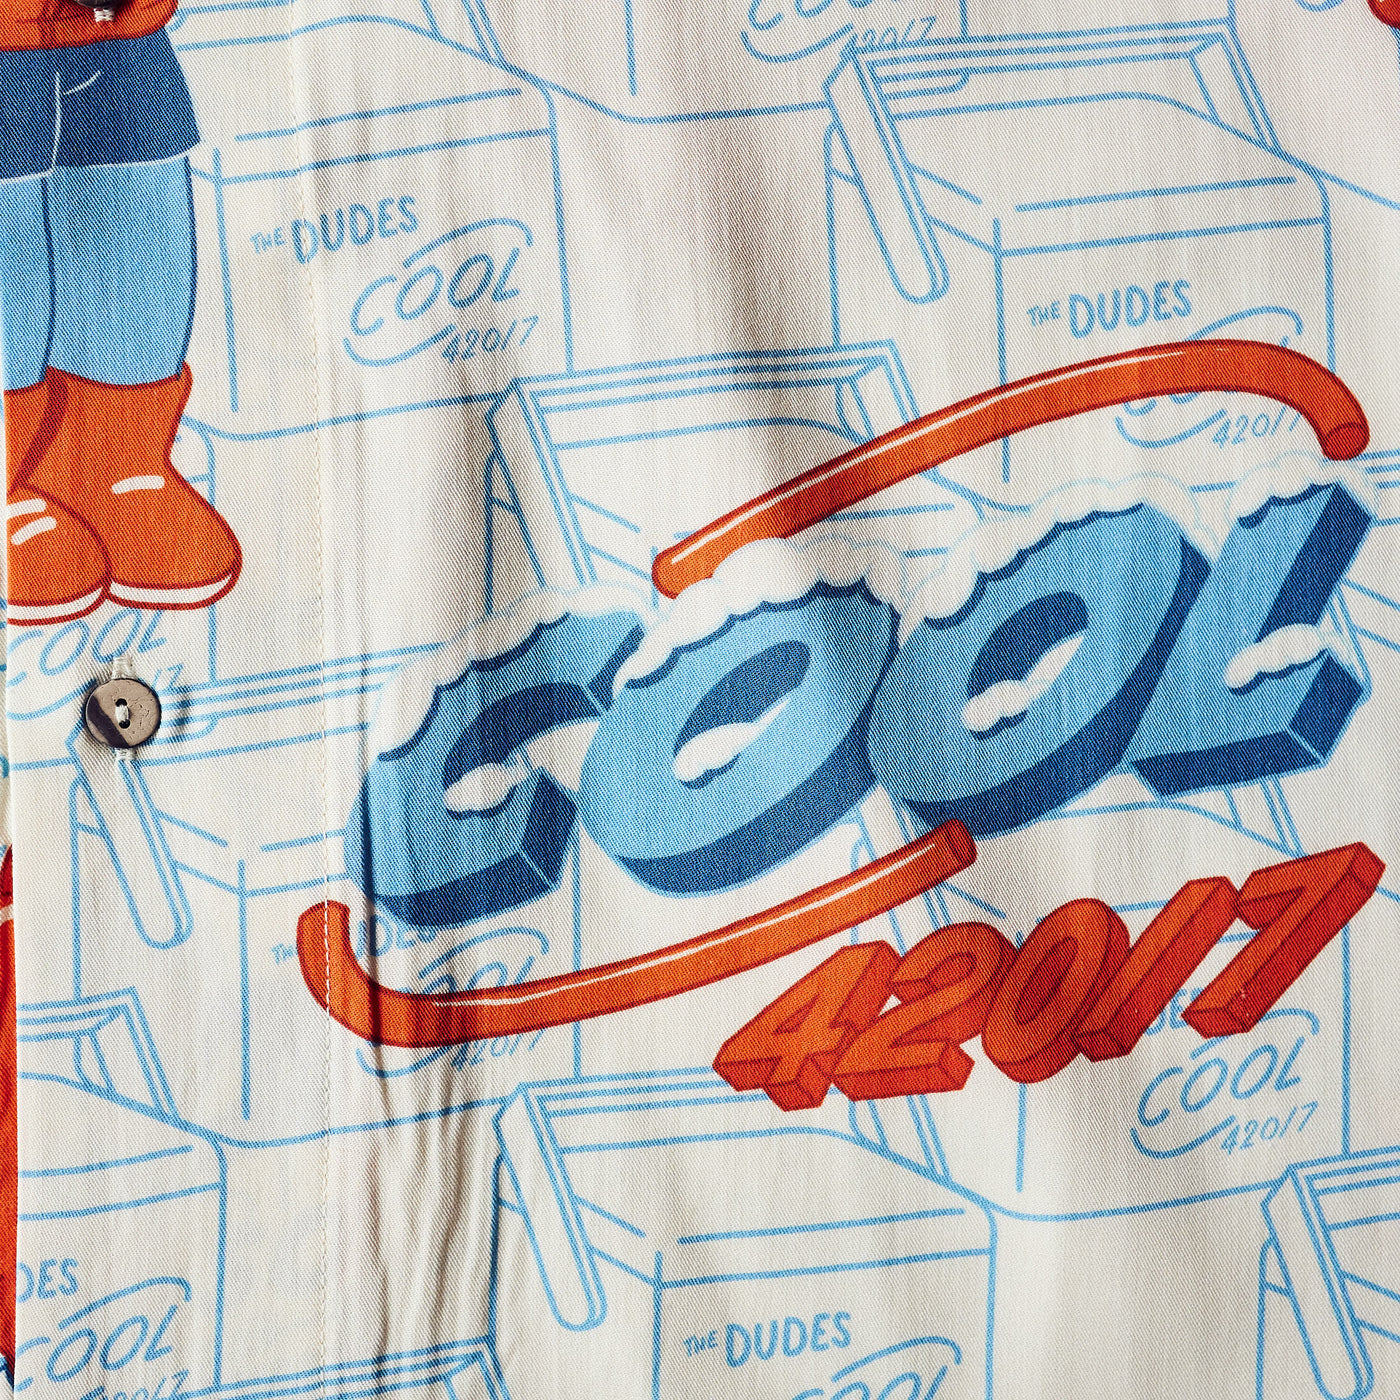 The Dudes - Cool 420 - The shirt